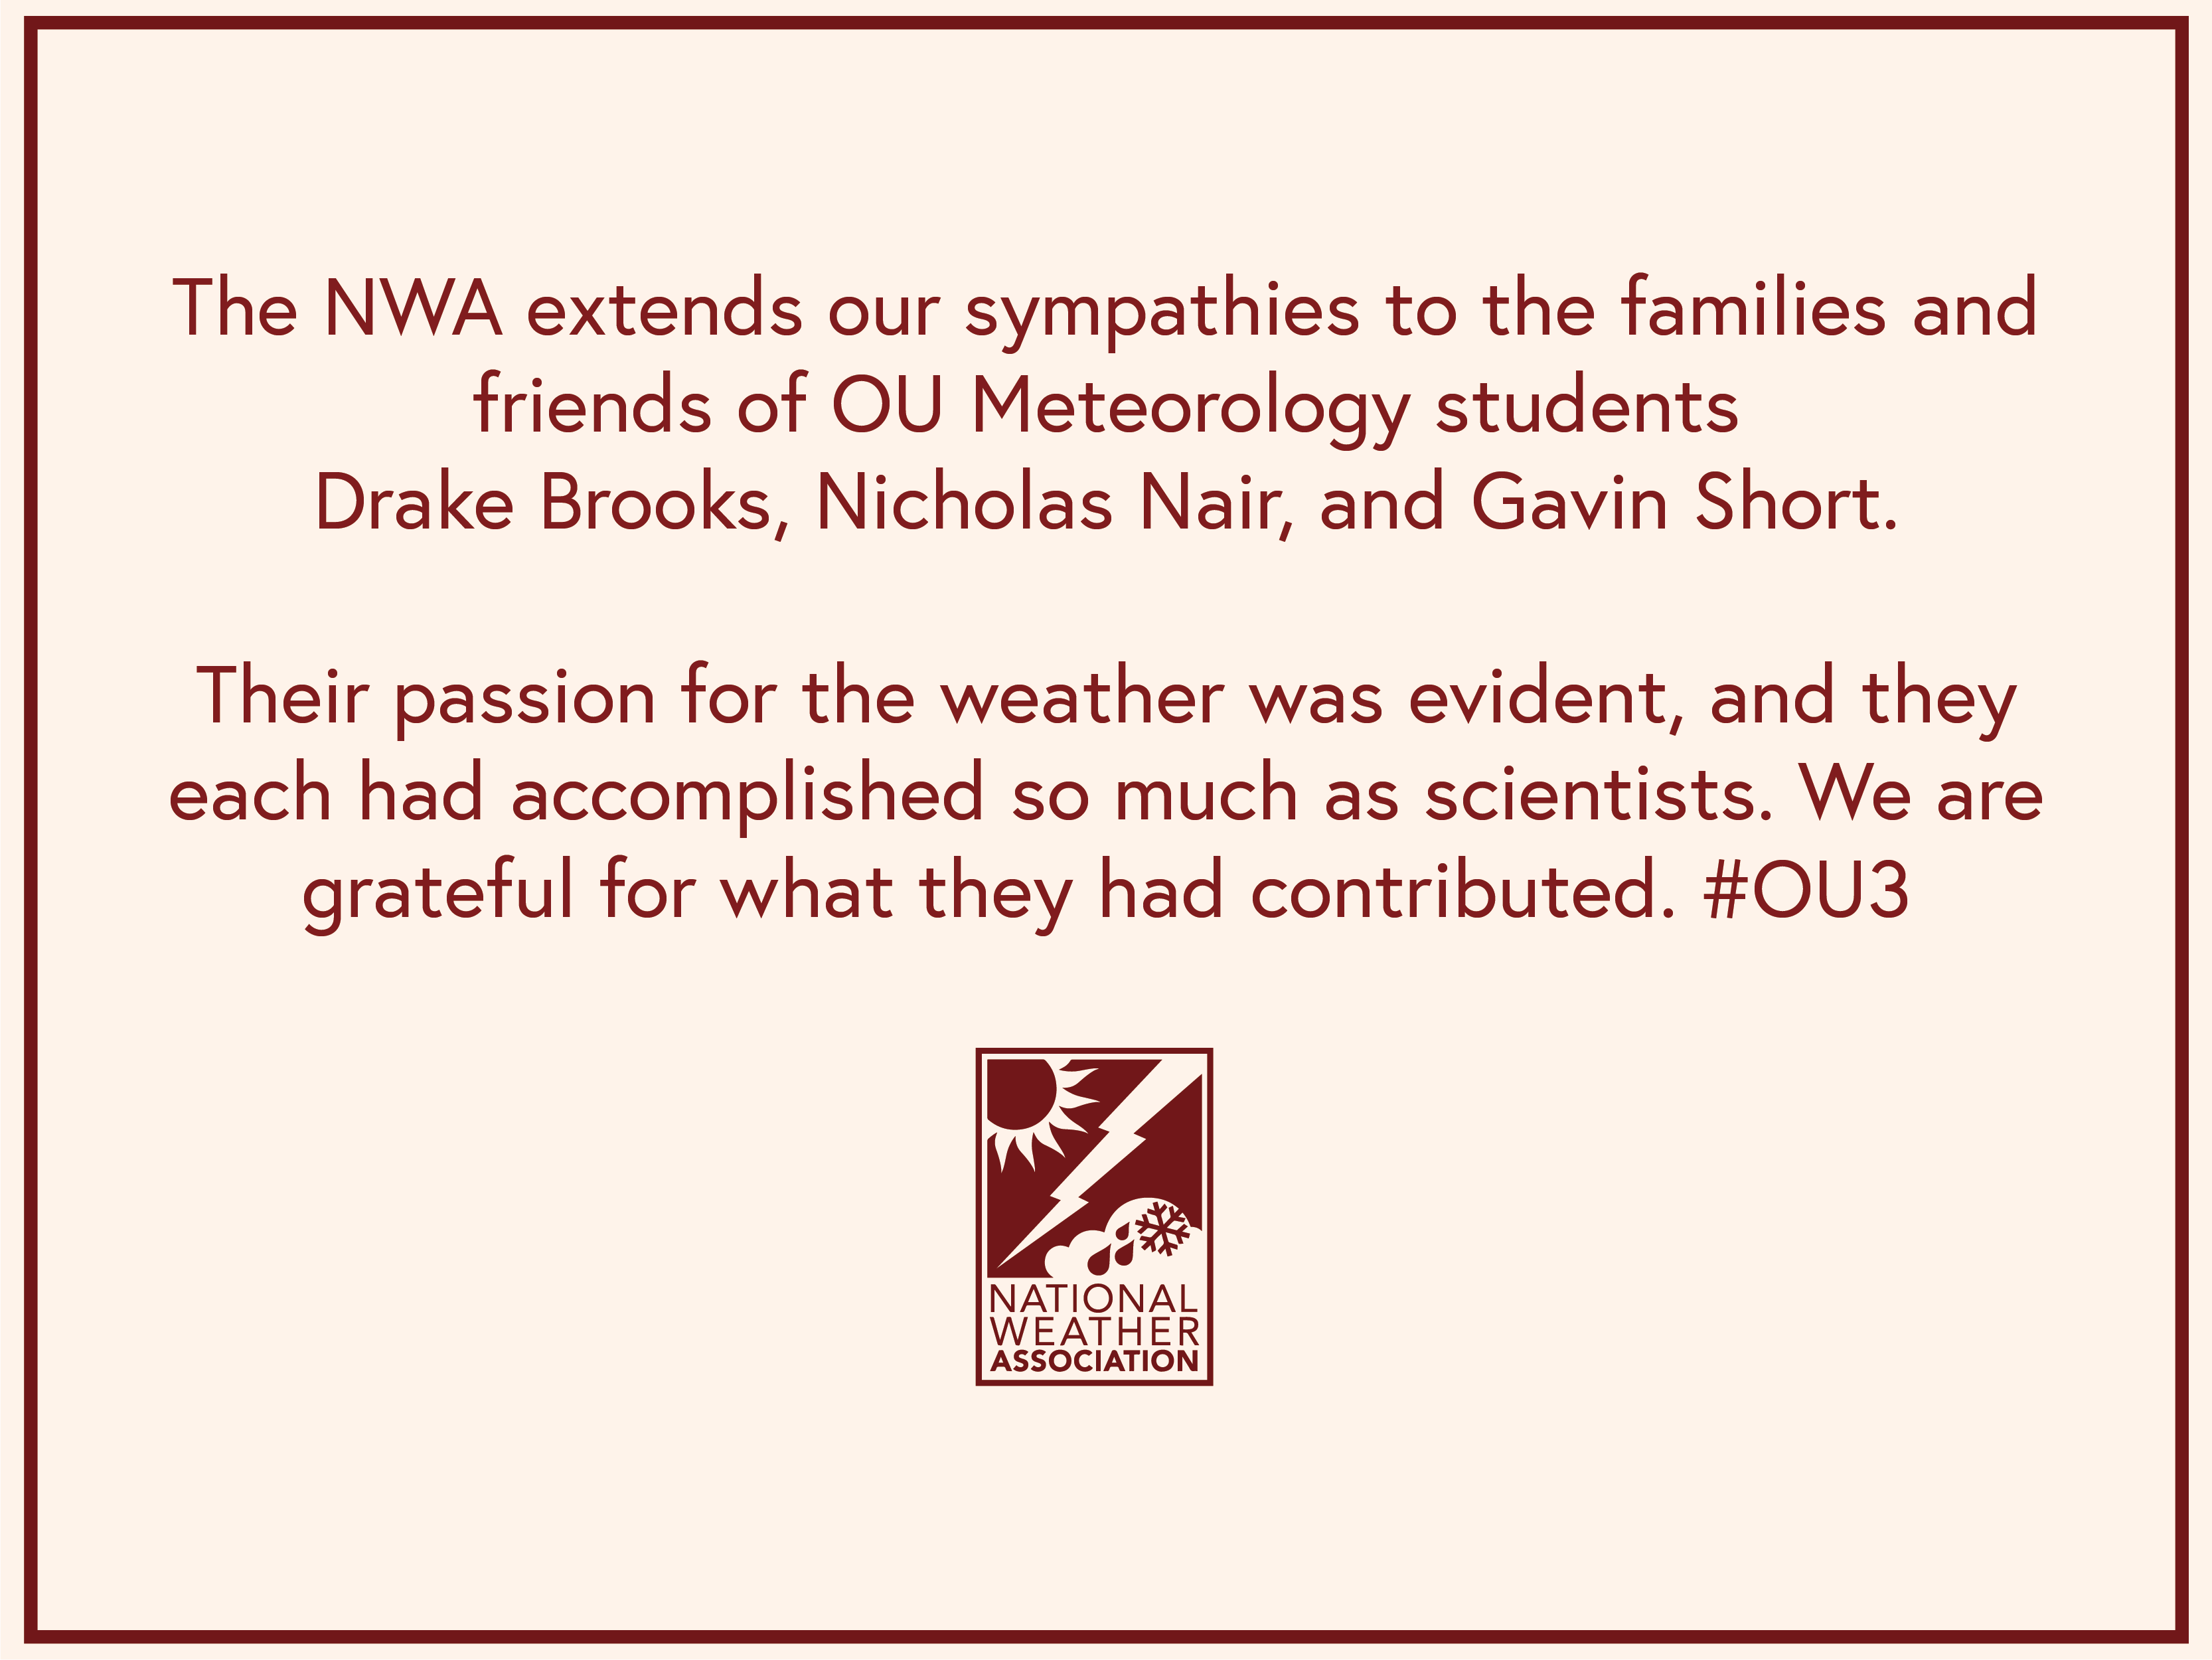 The NWA extends our sympathies to the families and friends of OU Meteorology students Drake Brooks, Nicholas Nair, and Gavin Short. #OU3  Their passion for the weather was evident, and they each had accomplished so much as scientists. We are grateful for what they had contributed.